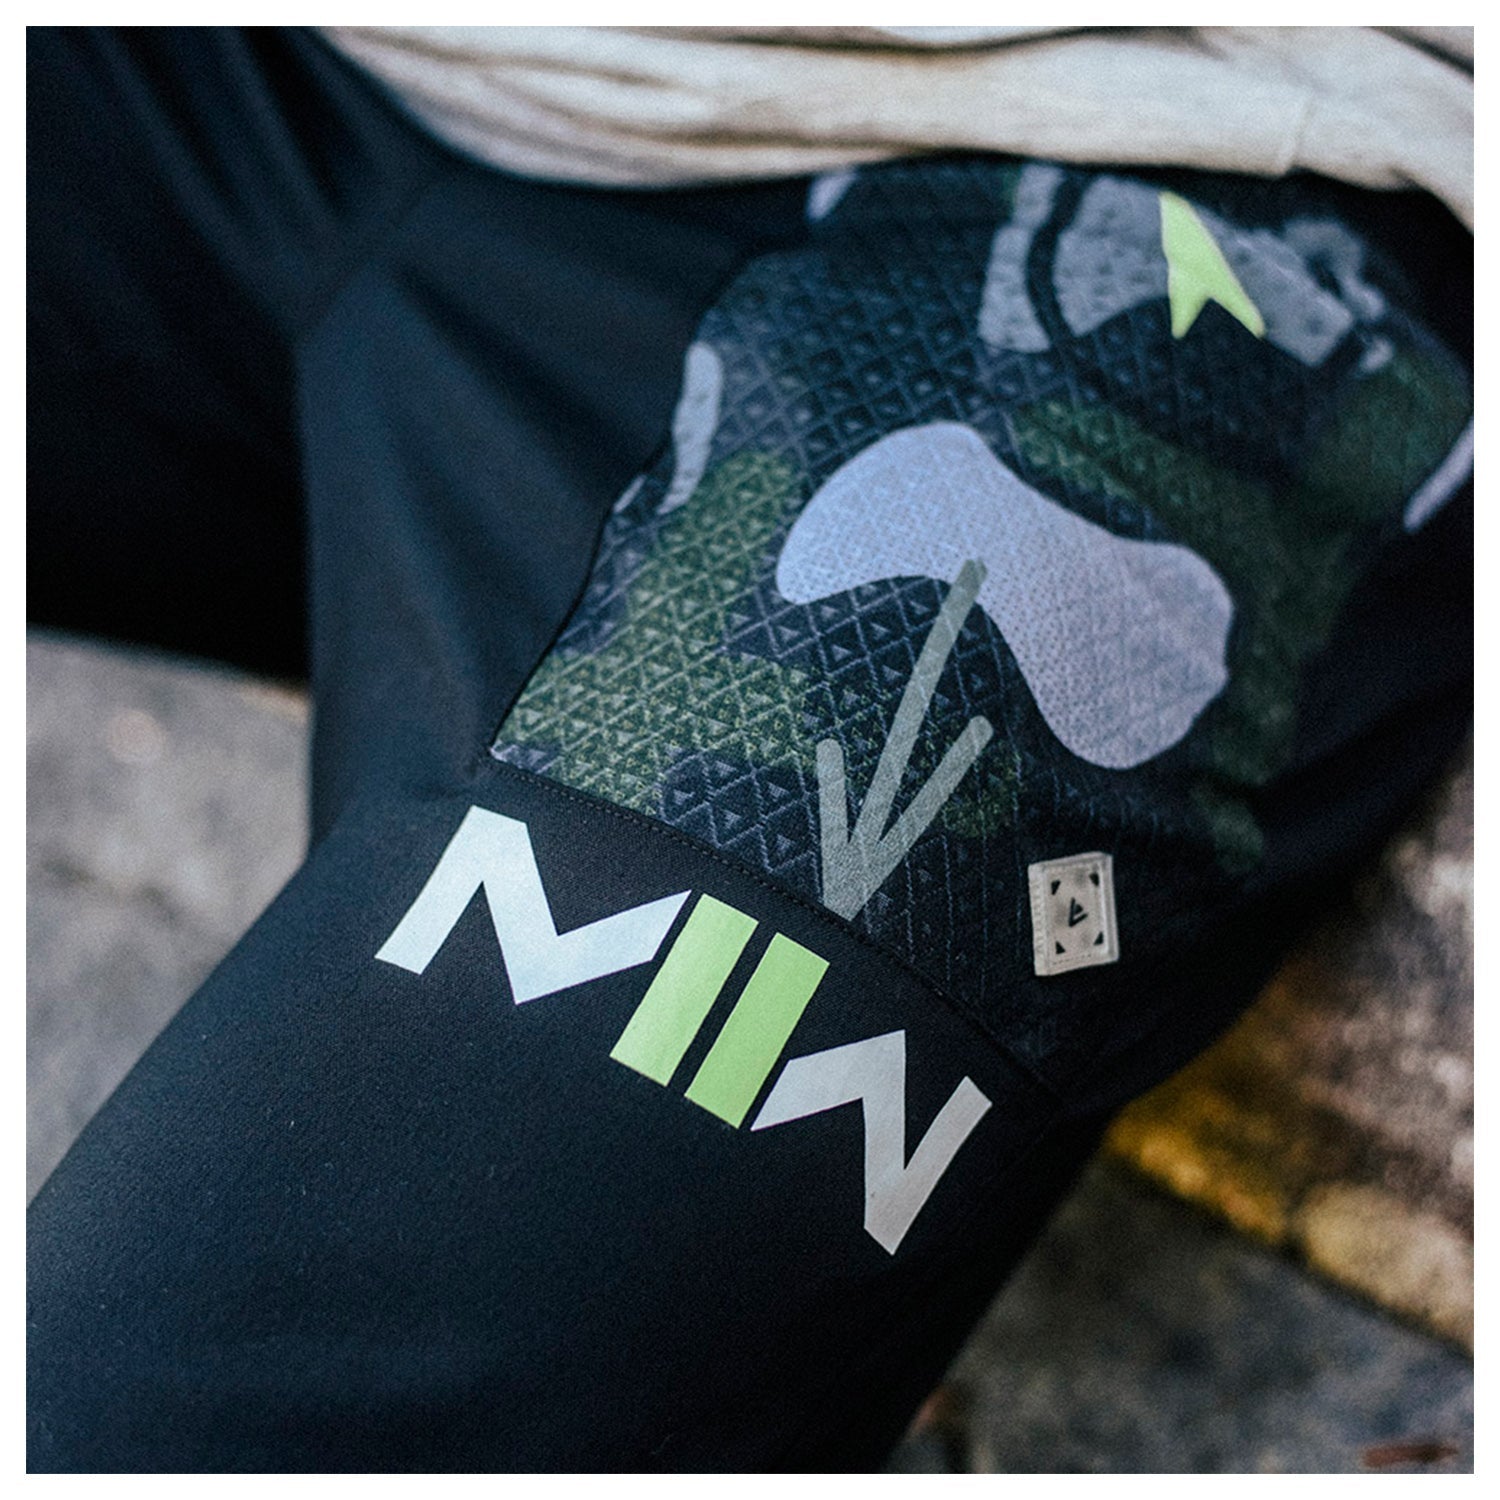 Call of Duty POINT3 MWII Black Joggers - Close Up View on Model